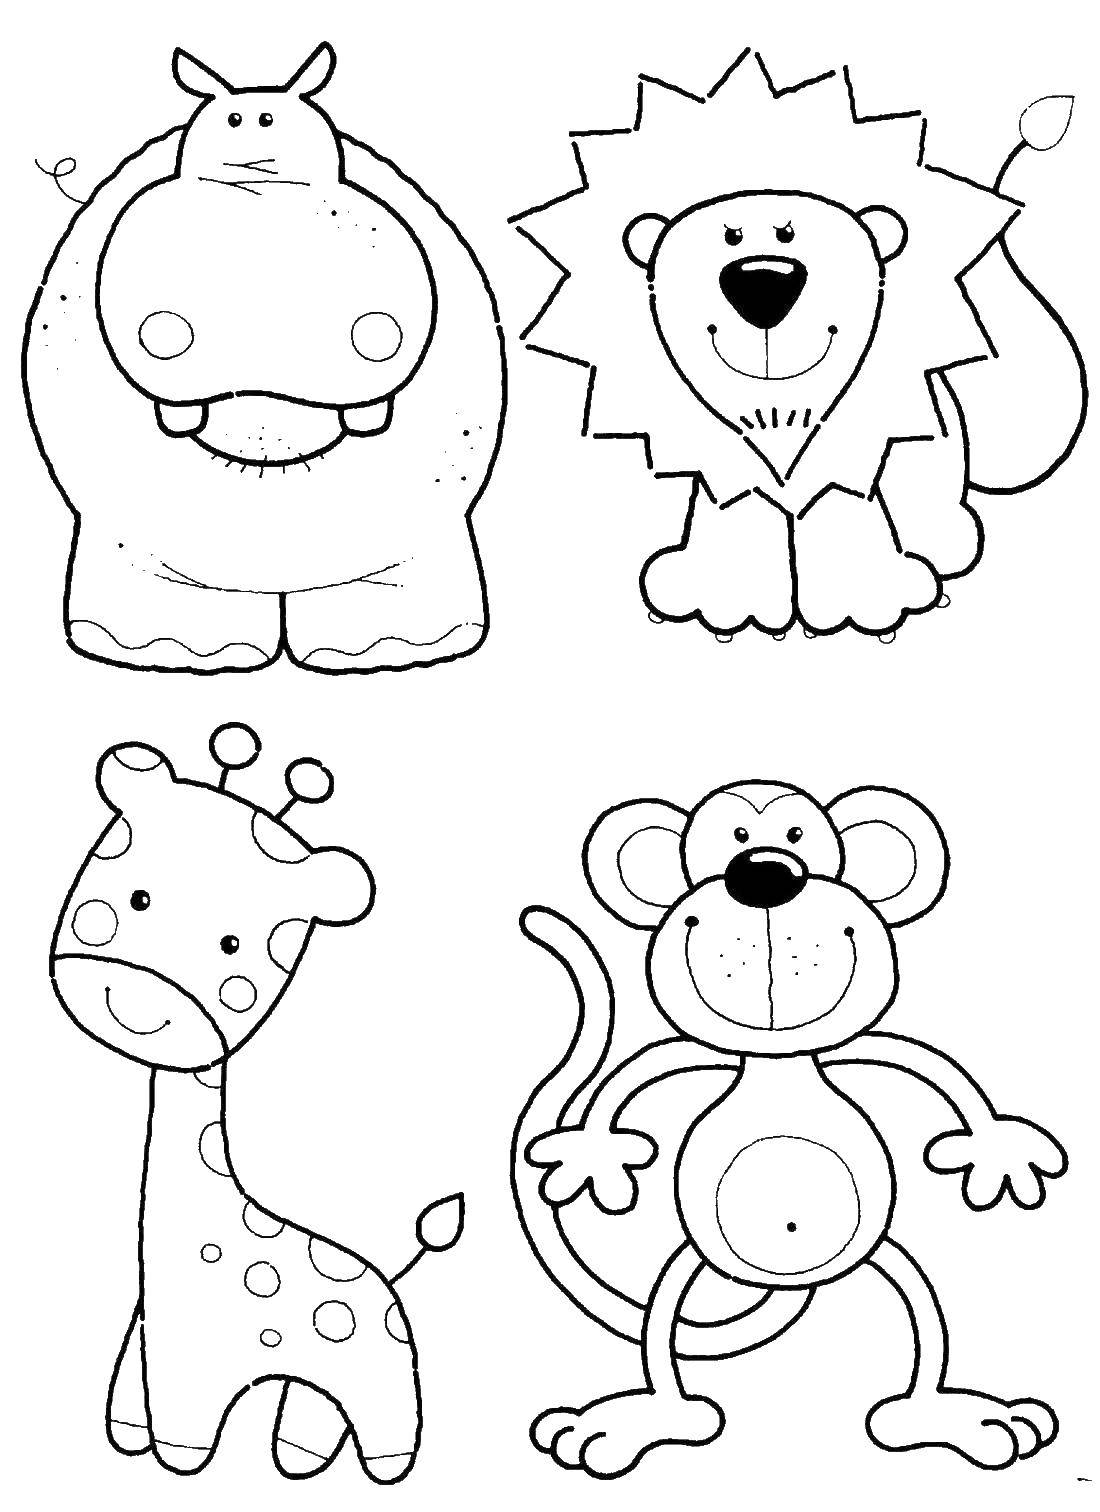 Coloring Animals: Hippo, lion, giraffe and monkey. Category Animals. Tags:  animals, nature, animals, Hippo, lion, giraffe, monkey.